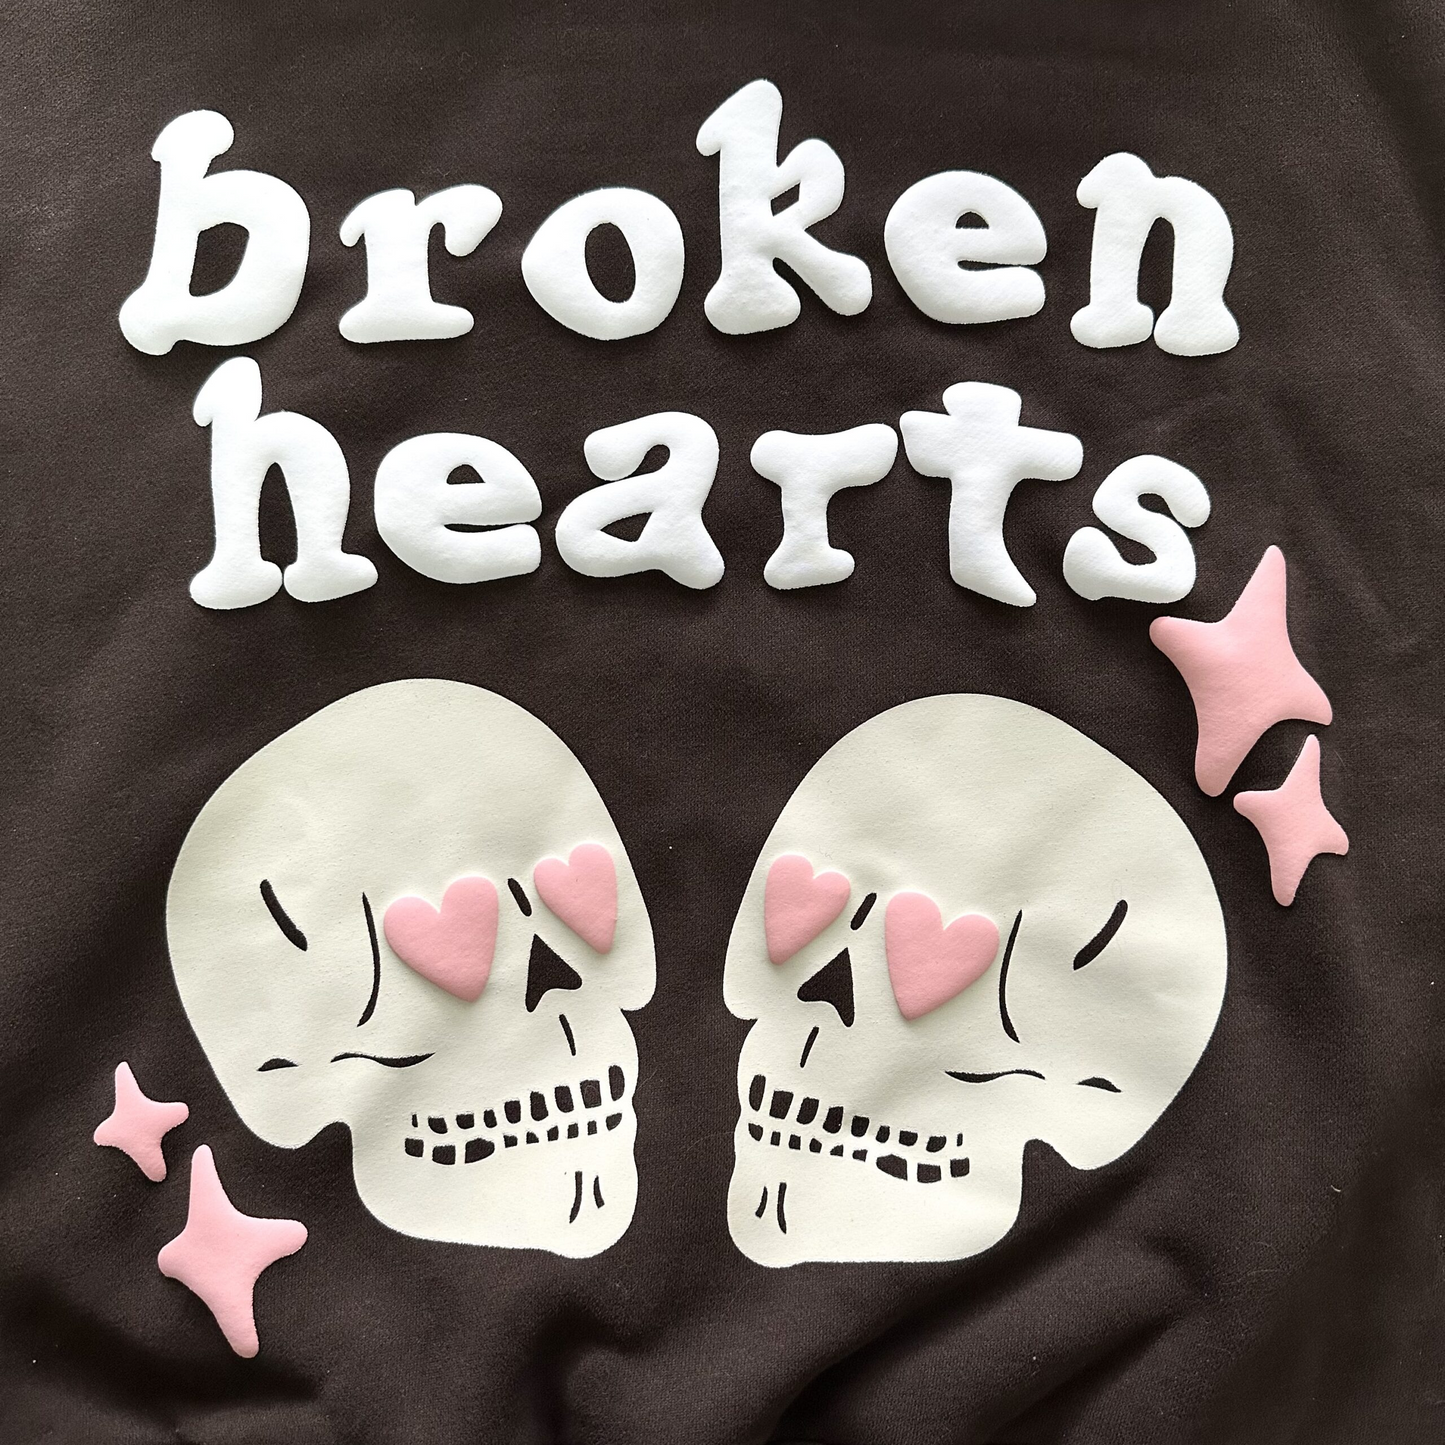 Broken Planet ‘Broken Hearts’ Hoodie And Trousers Tracksuits